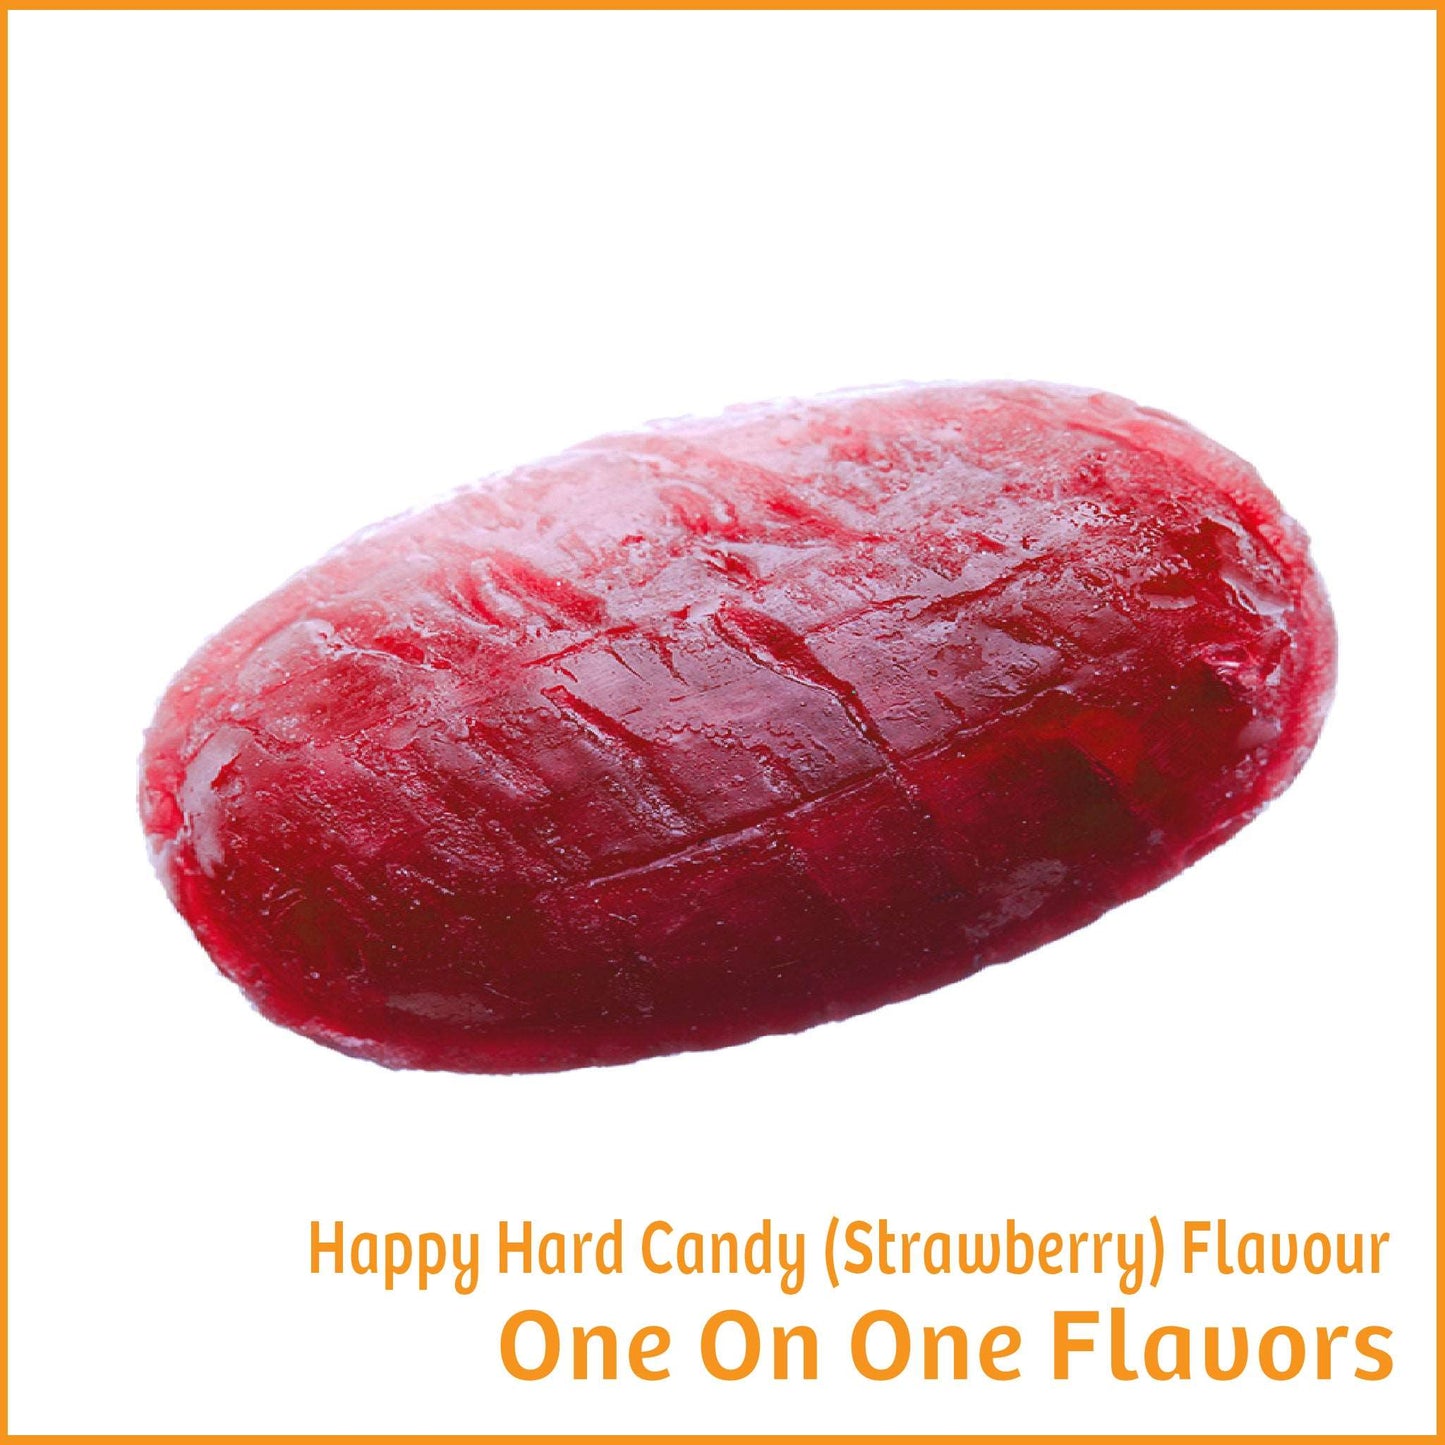 Happy Hard Candy (Strawberry) Flavour- One On One Flavors - Flavour Fog - Canada's flavour depot.